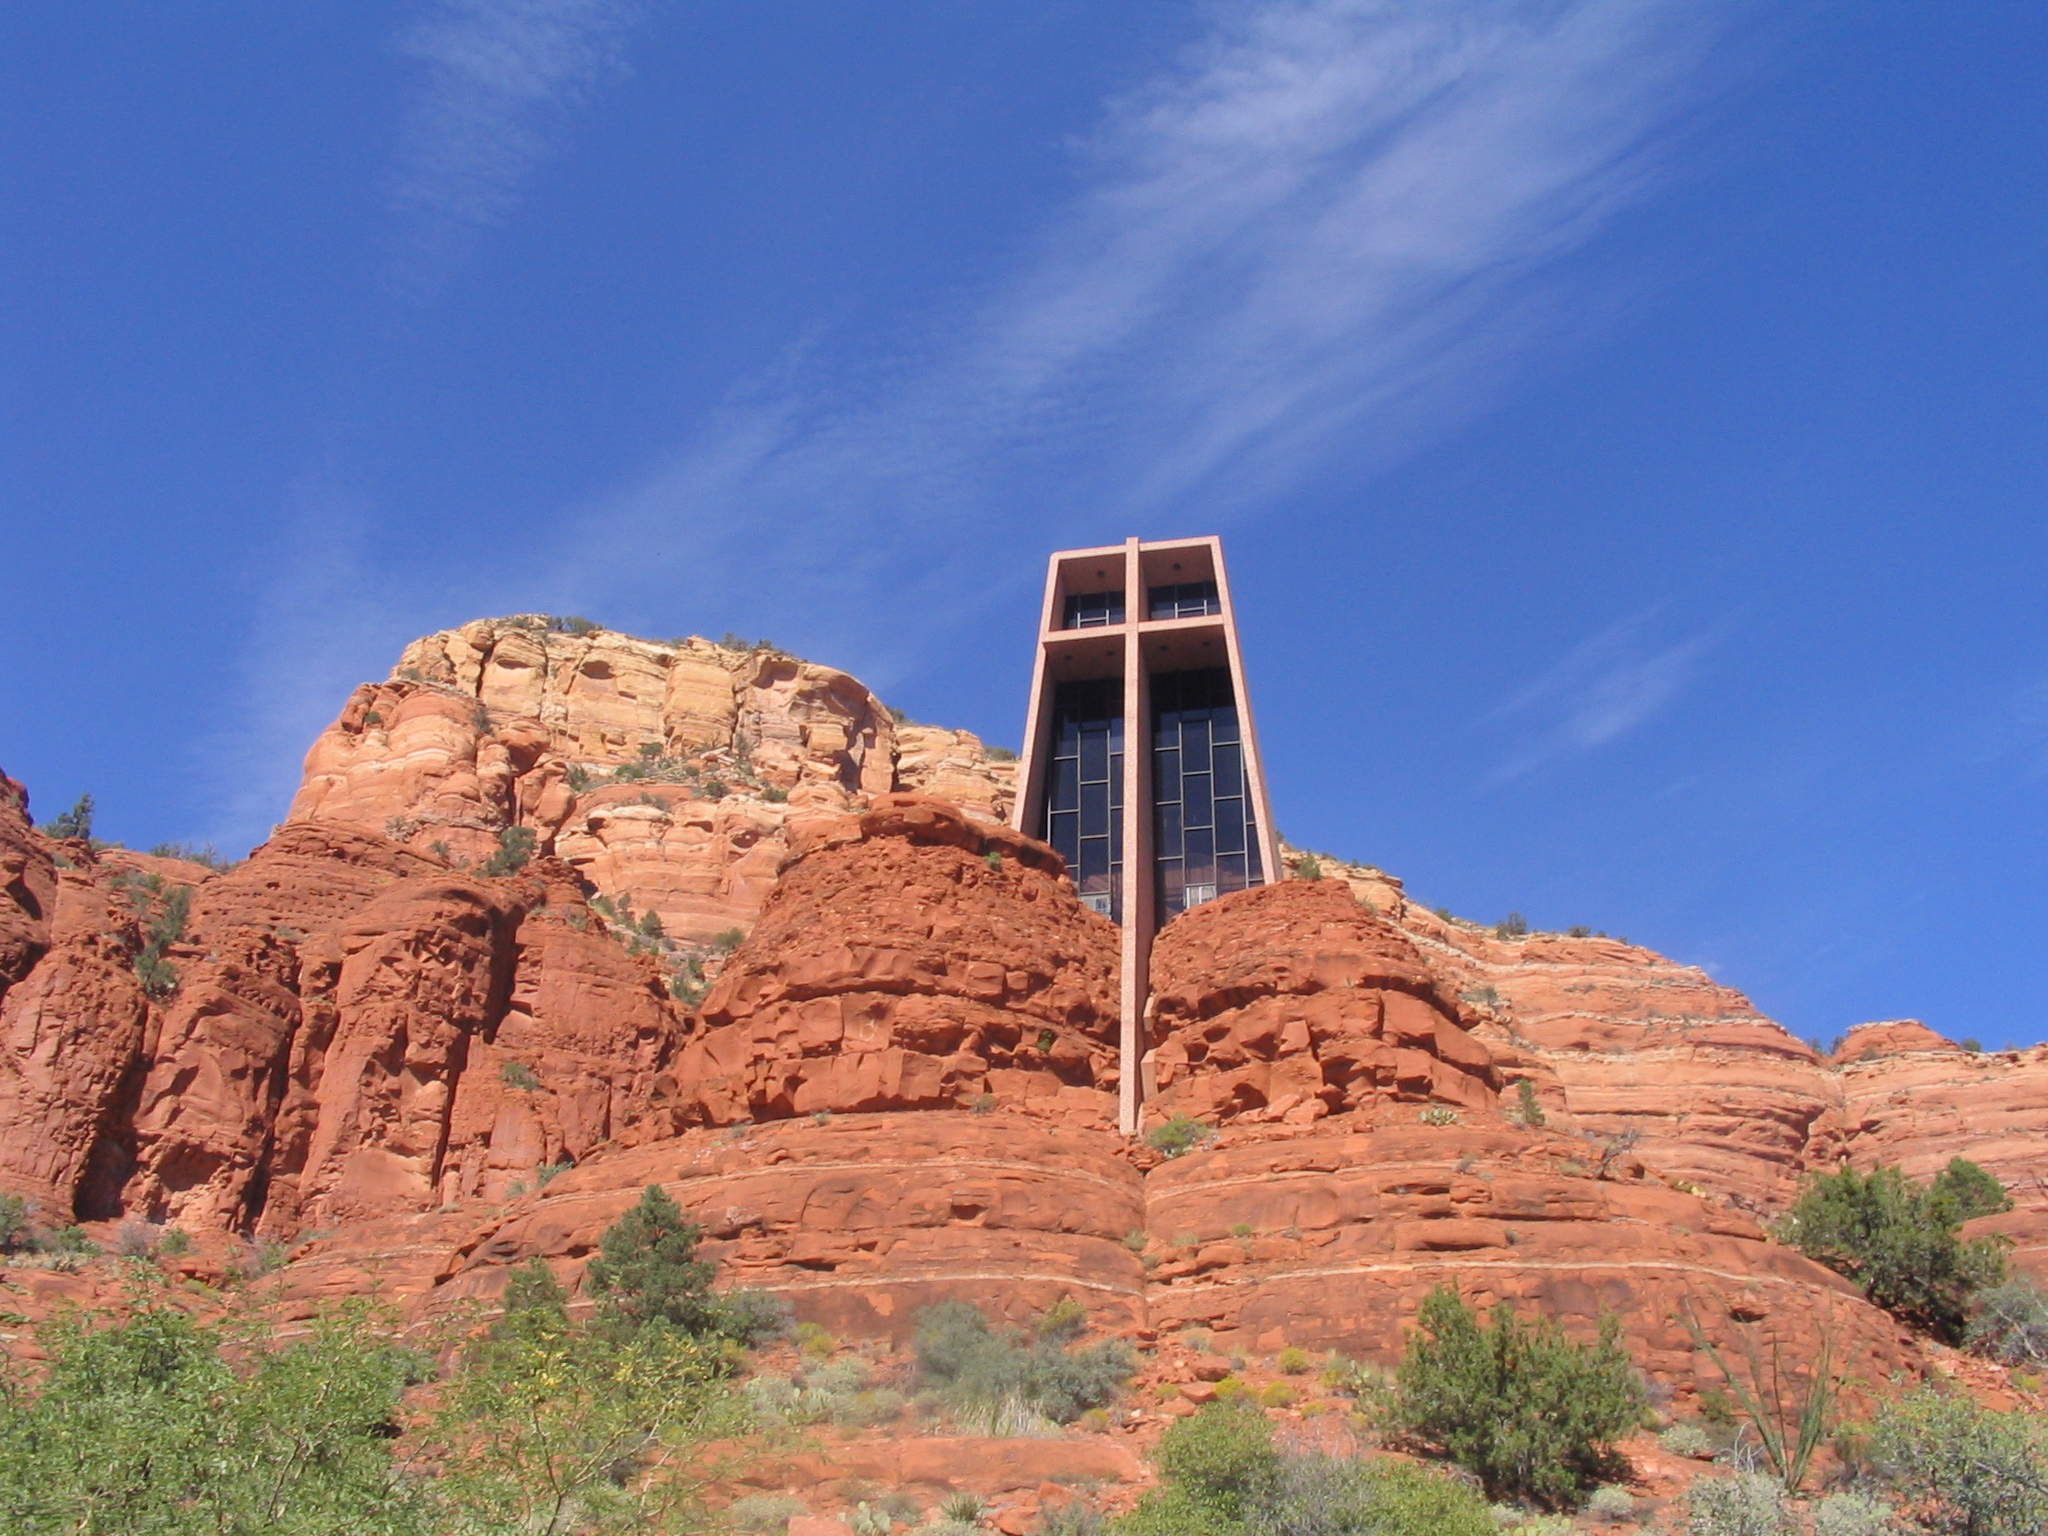 Chapel of the Holy Cross in Sedona. Uploaded by img107.imageshack.us.